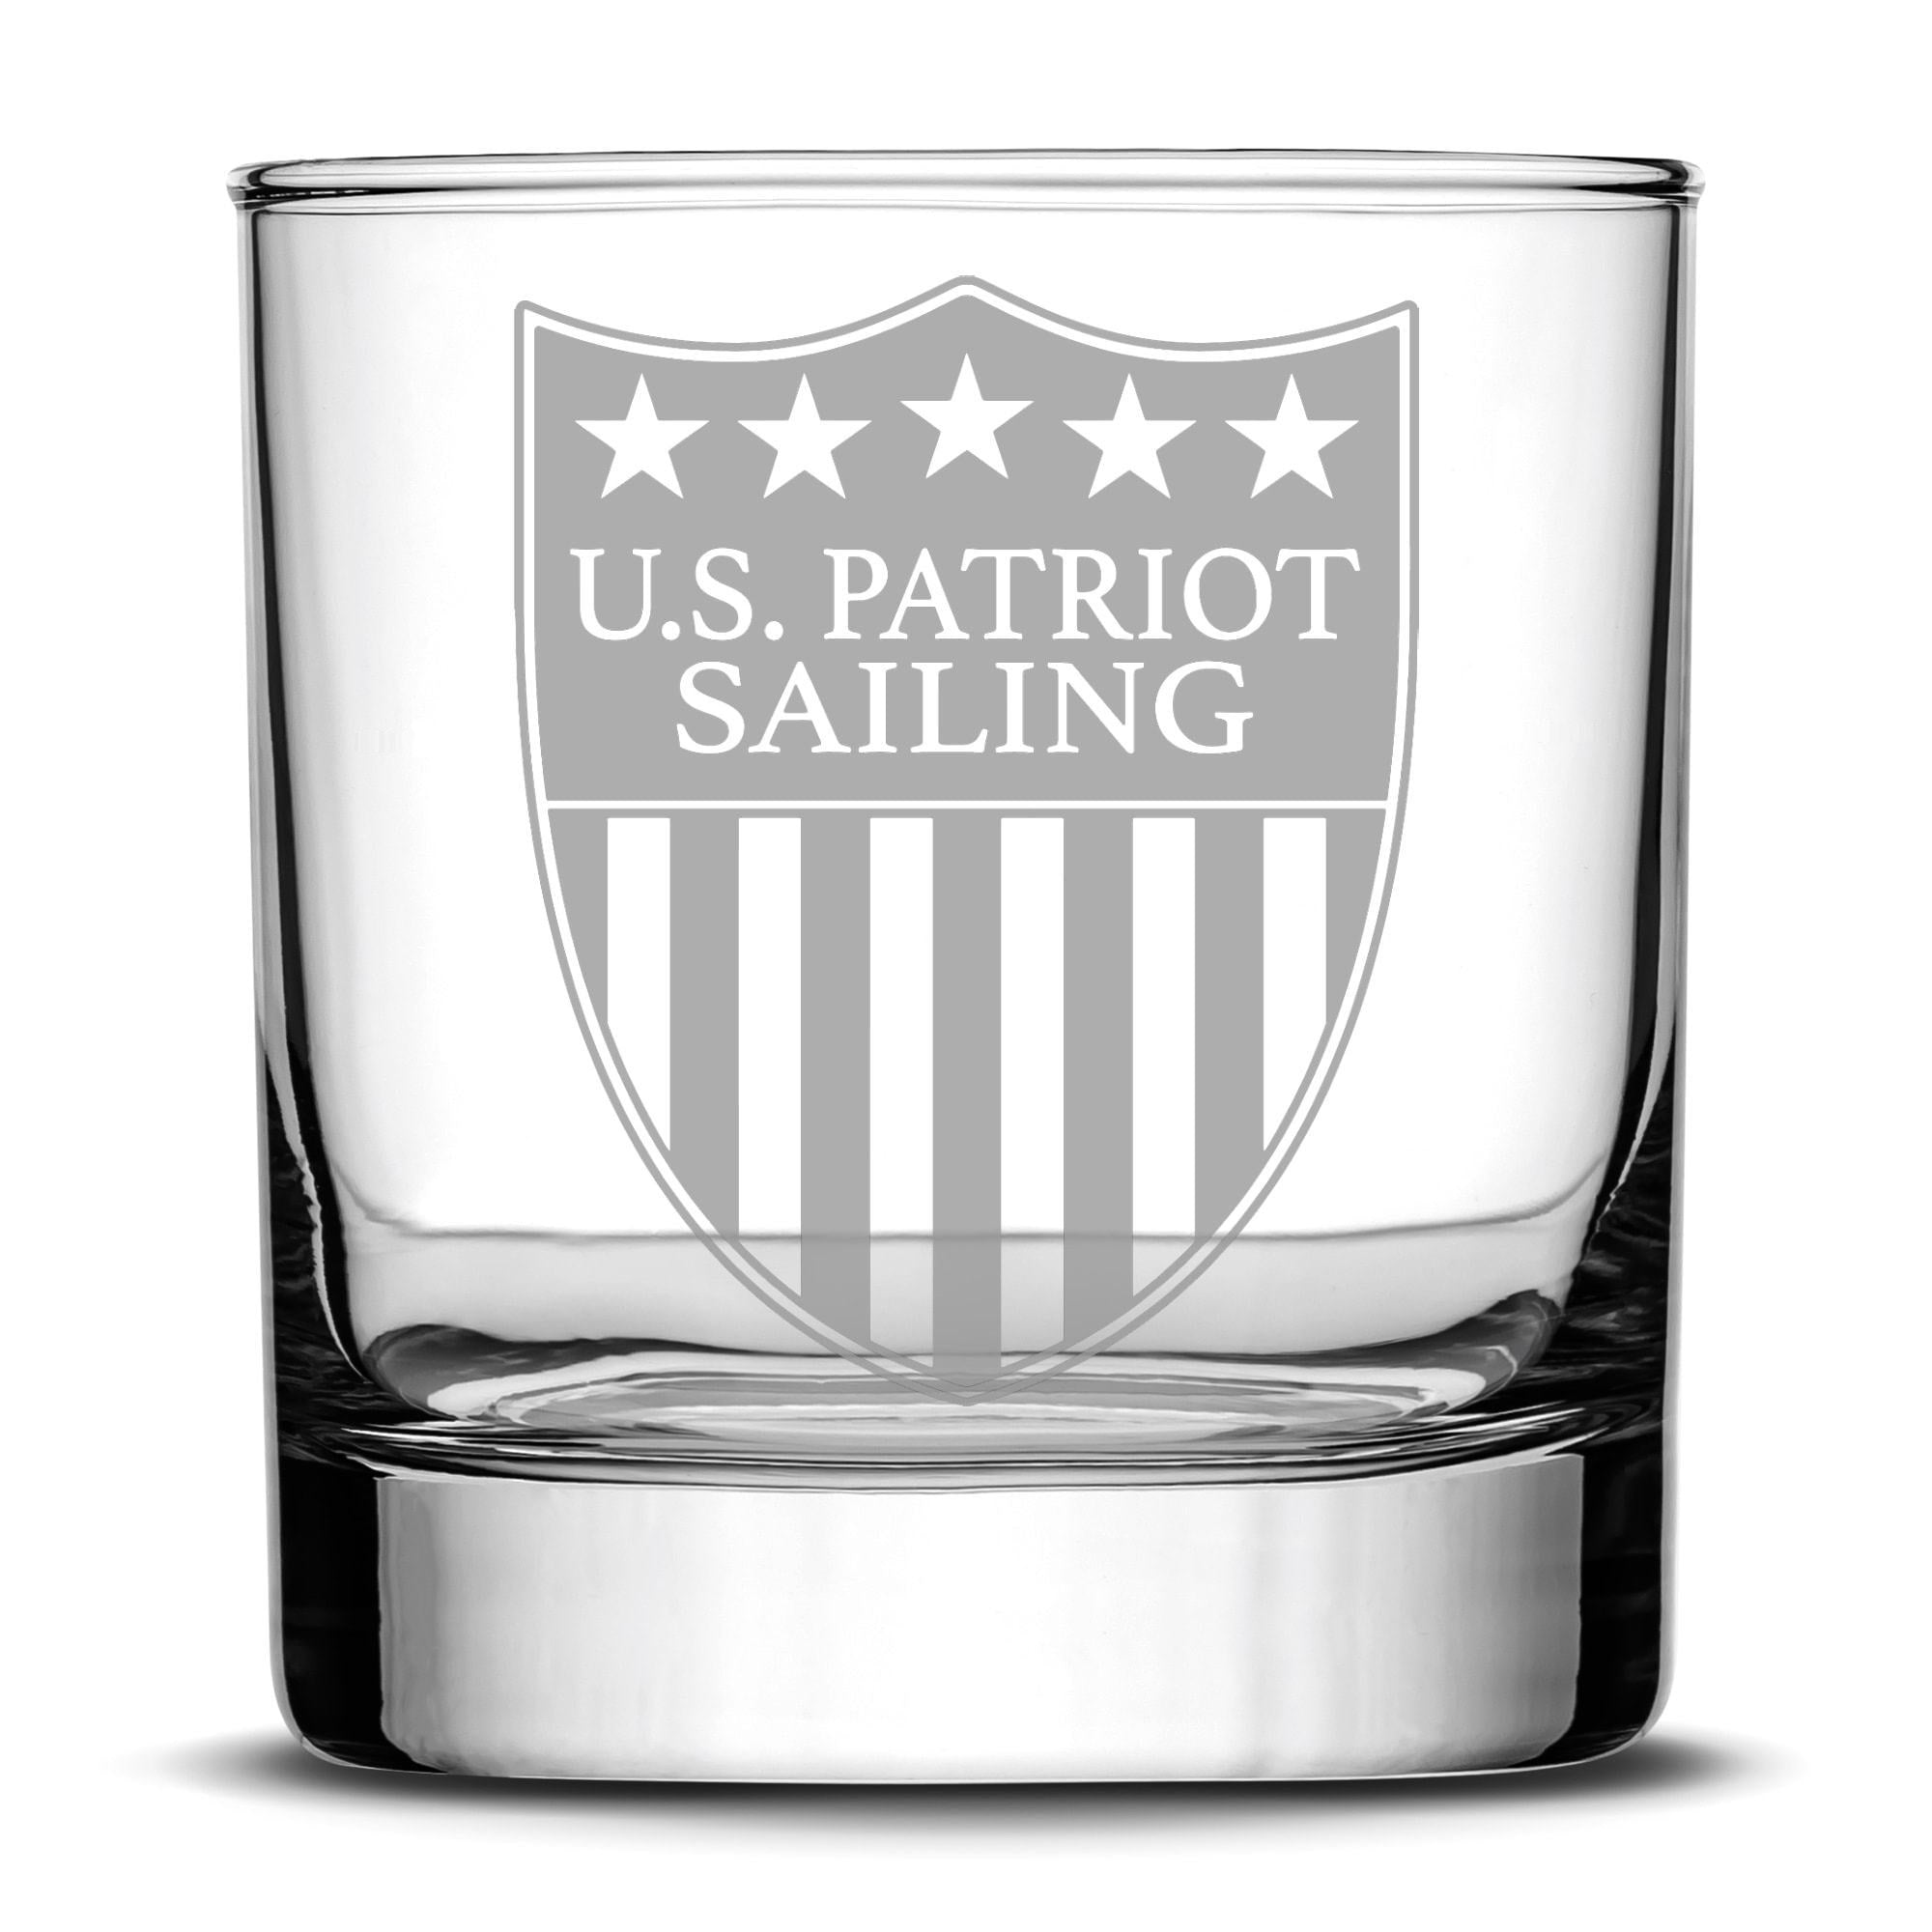 Premium US Patriot Sailing Whiskey Glass, 10oz Deep Etched Rocks Glass, Made in USA by Integrity Bottles